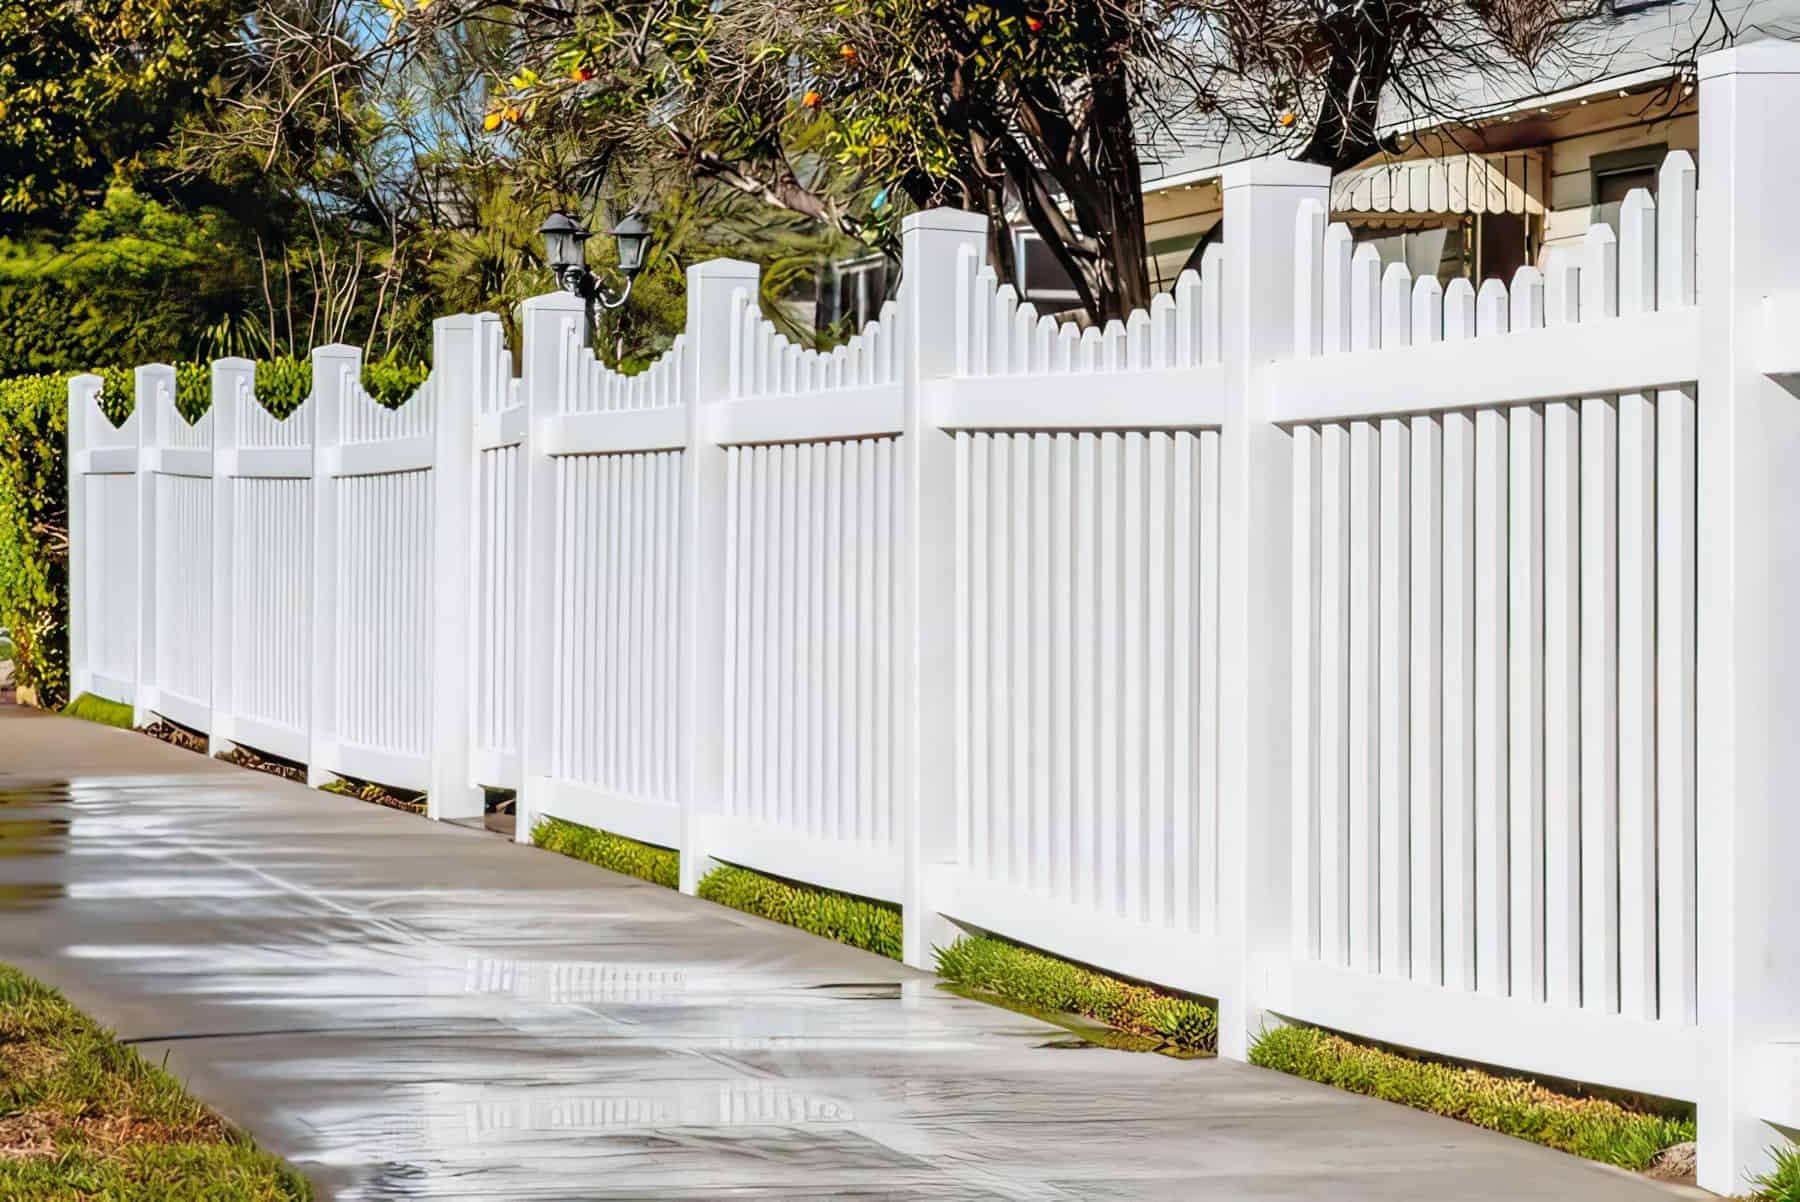 Pure white vinyl scalloped picket fence next to sidewalk and lush front lawn with trees and lampposts surrounding it.